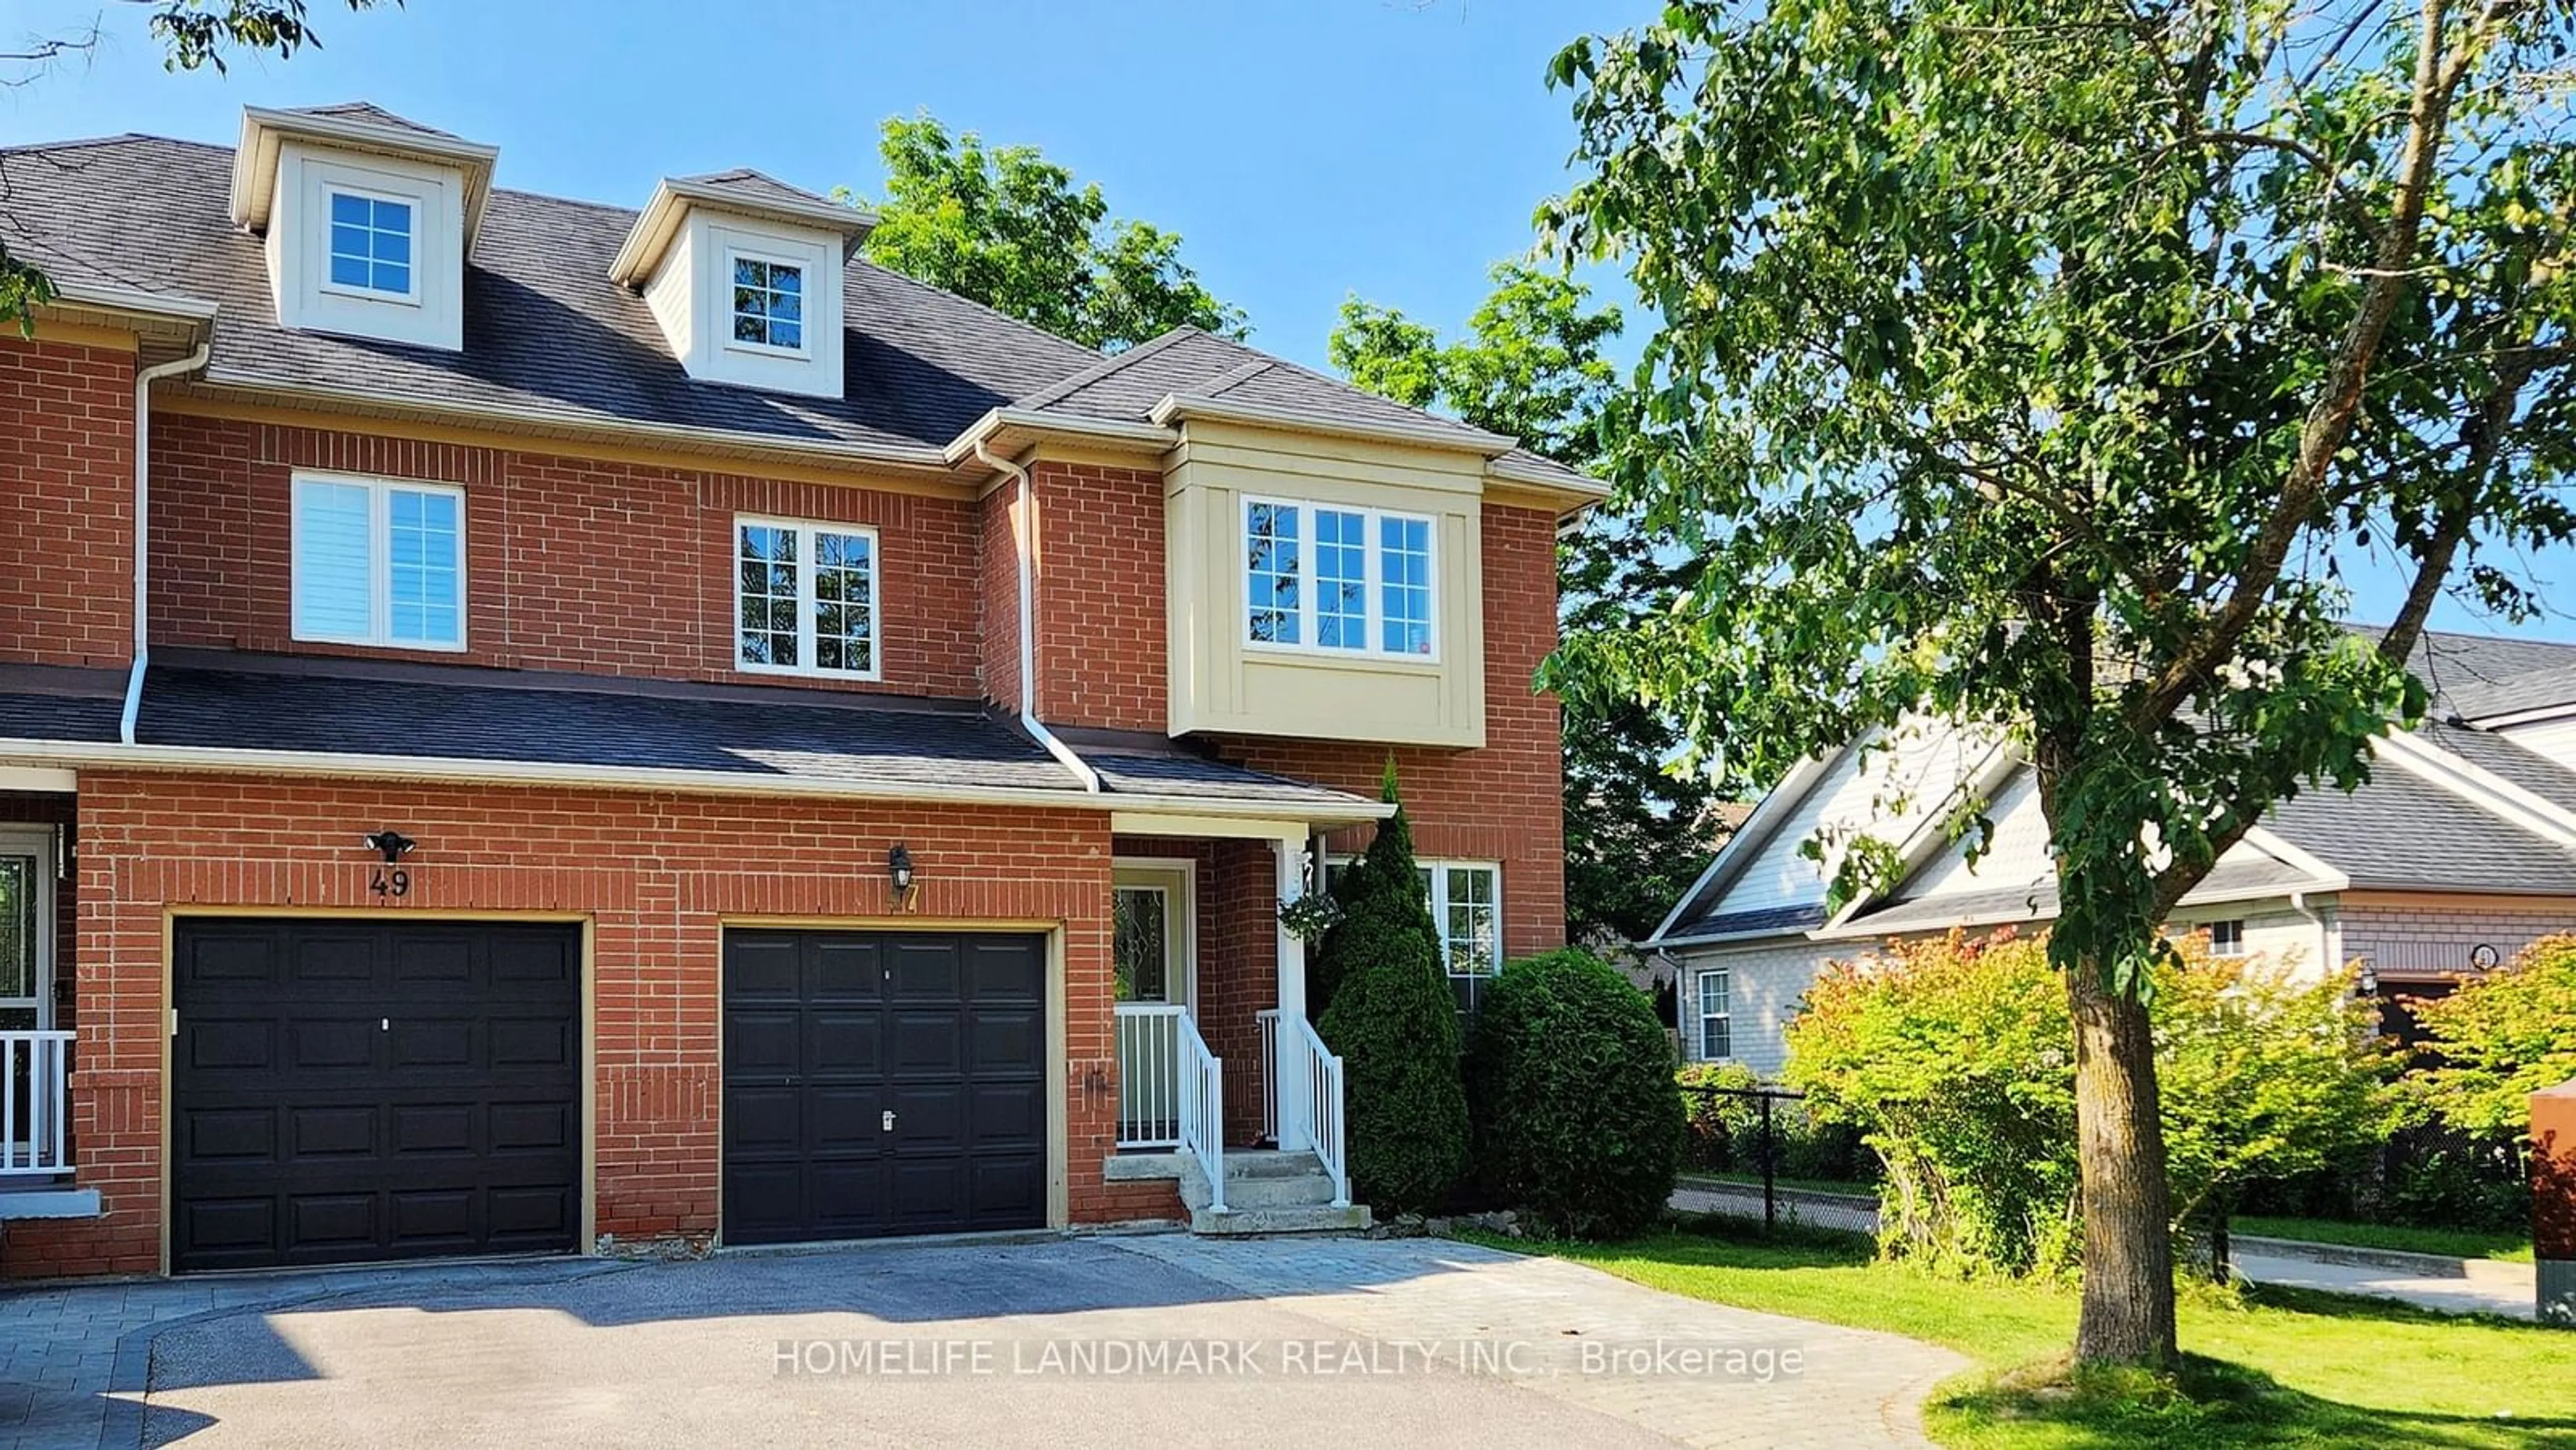 Home with brick exterior material for 47 Steckley St, Aurora Ontario L4G 7K6